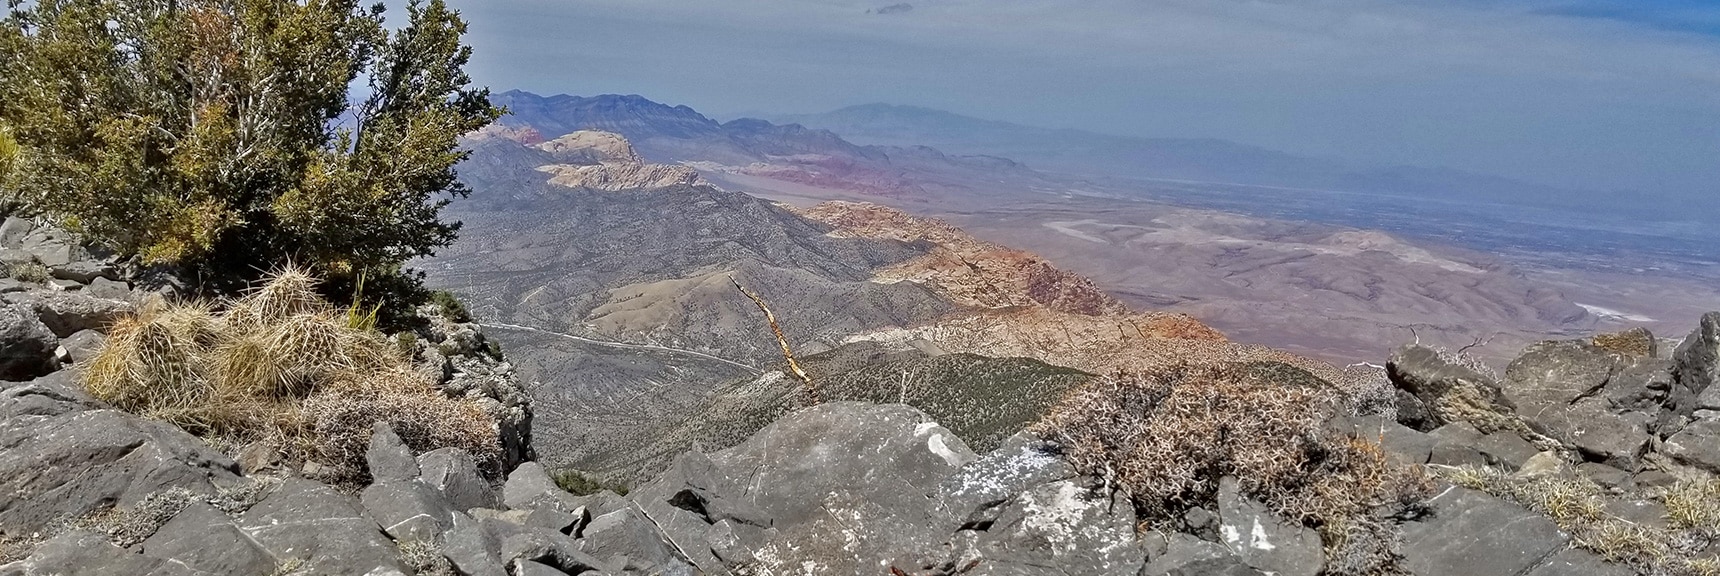 Red Rock Park and La Madre Mountains Wilderness Viewed from the North Summit. | Potosi Mountain Spring Mountains Nevada